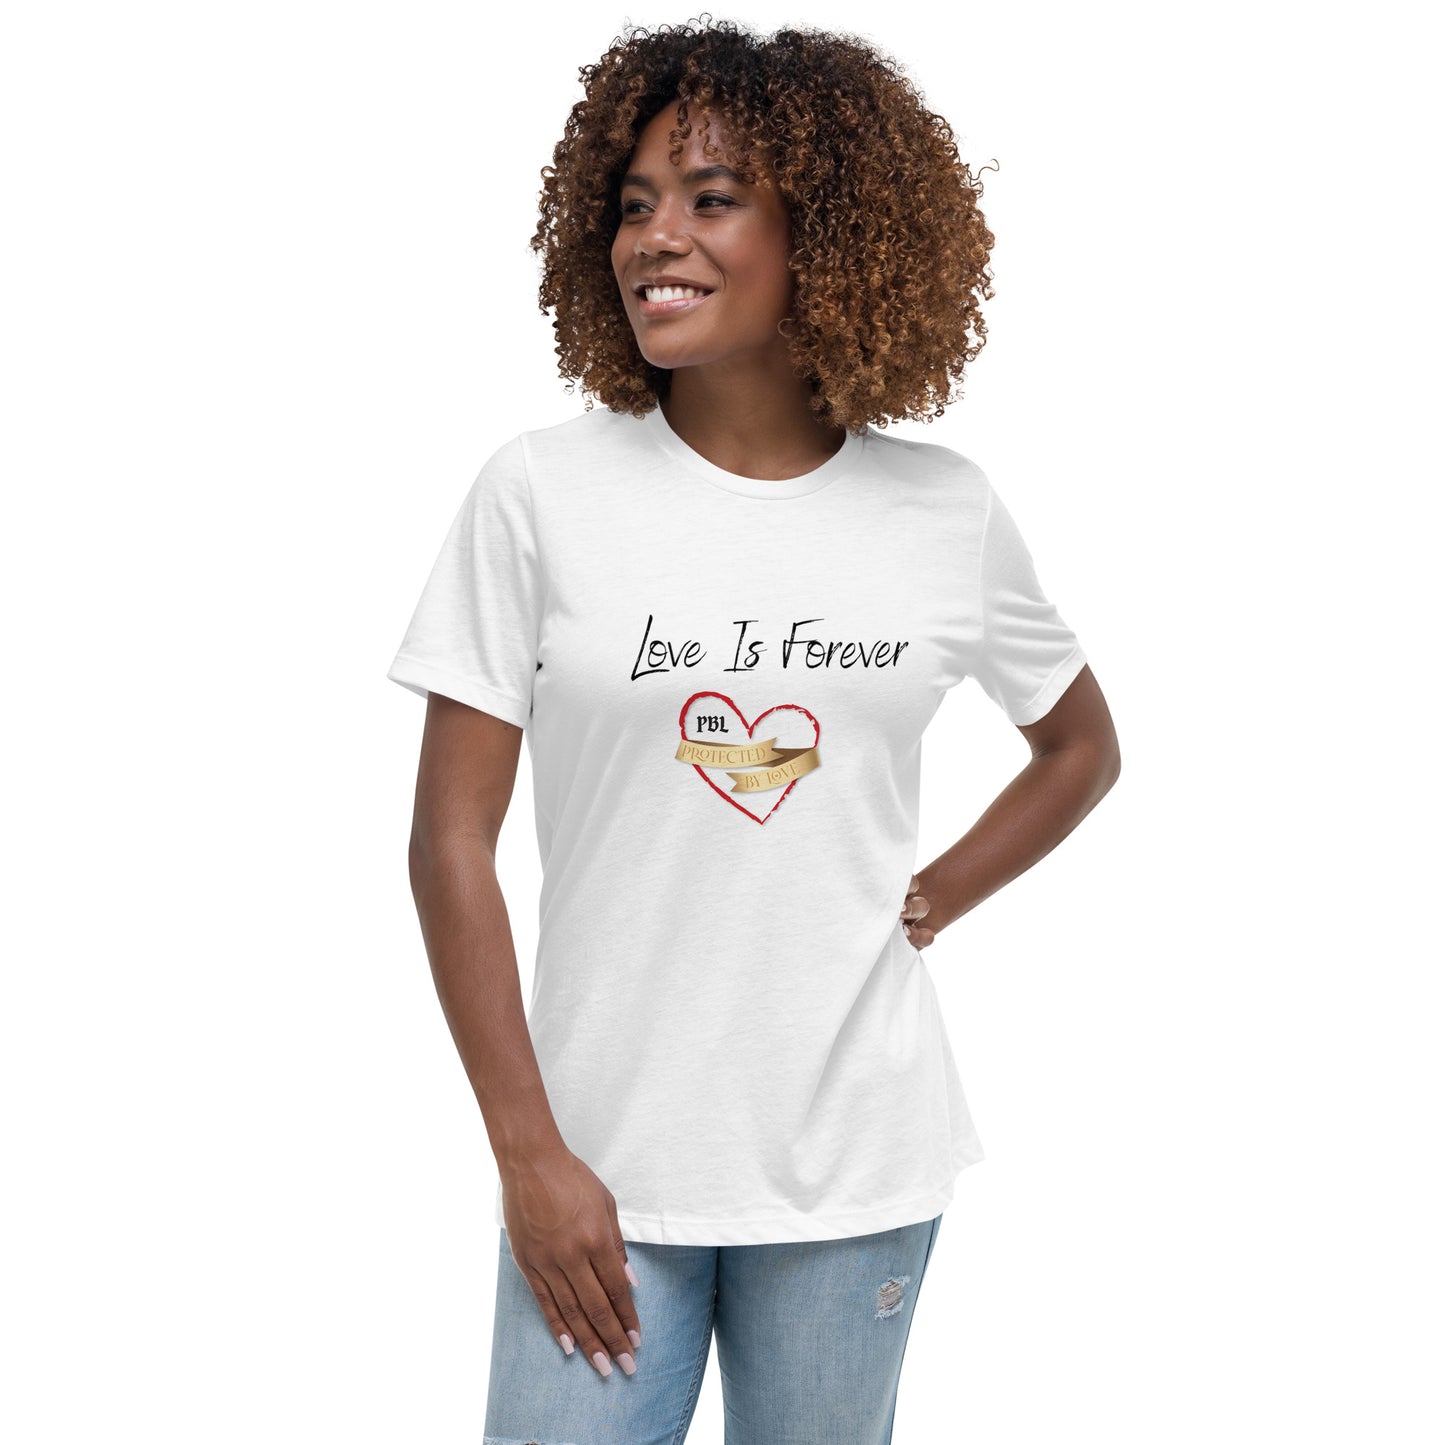 Love Is Forever - Protected By Love Women's T-Shirt